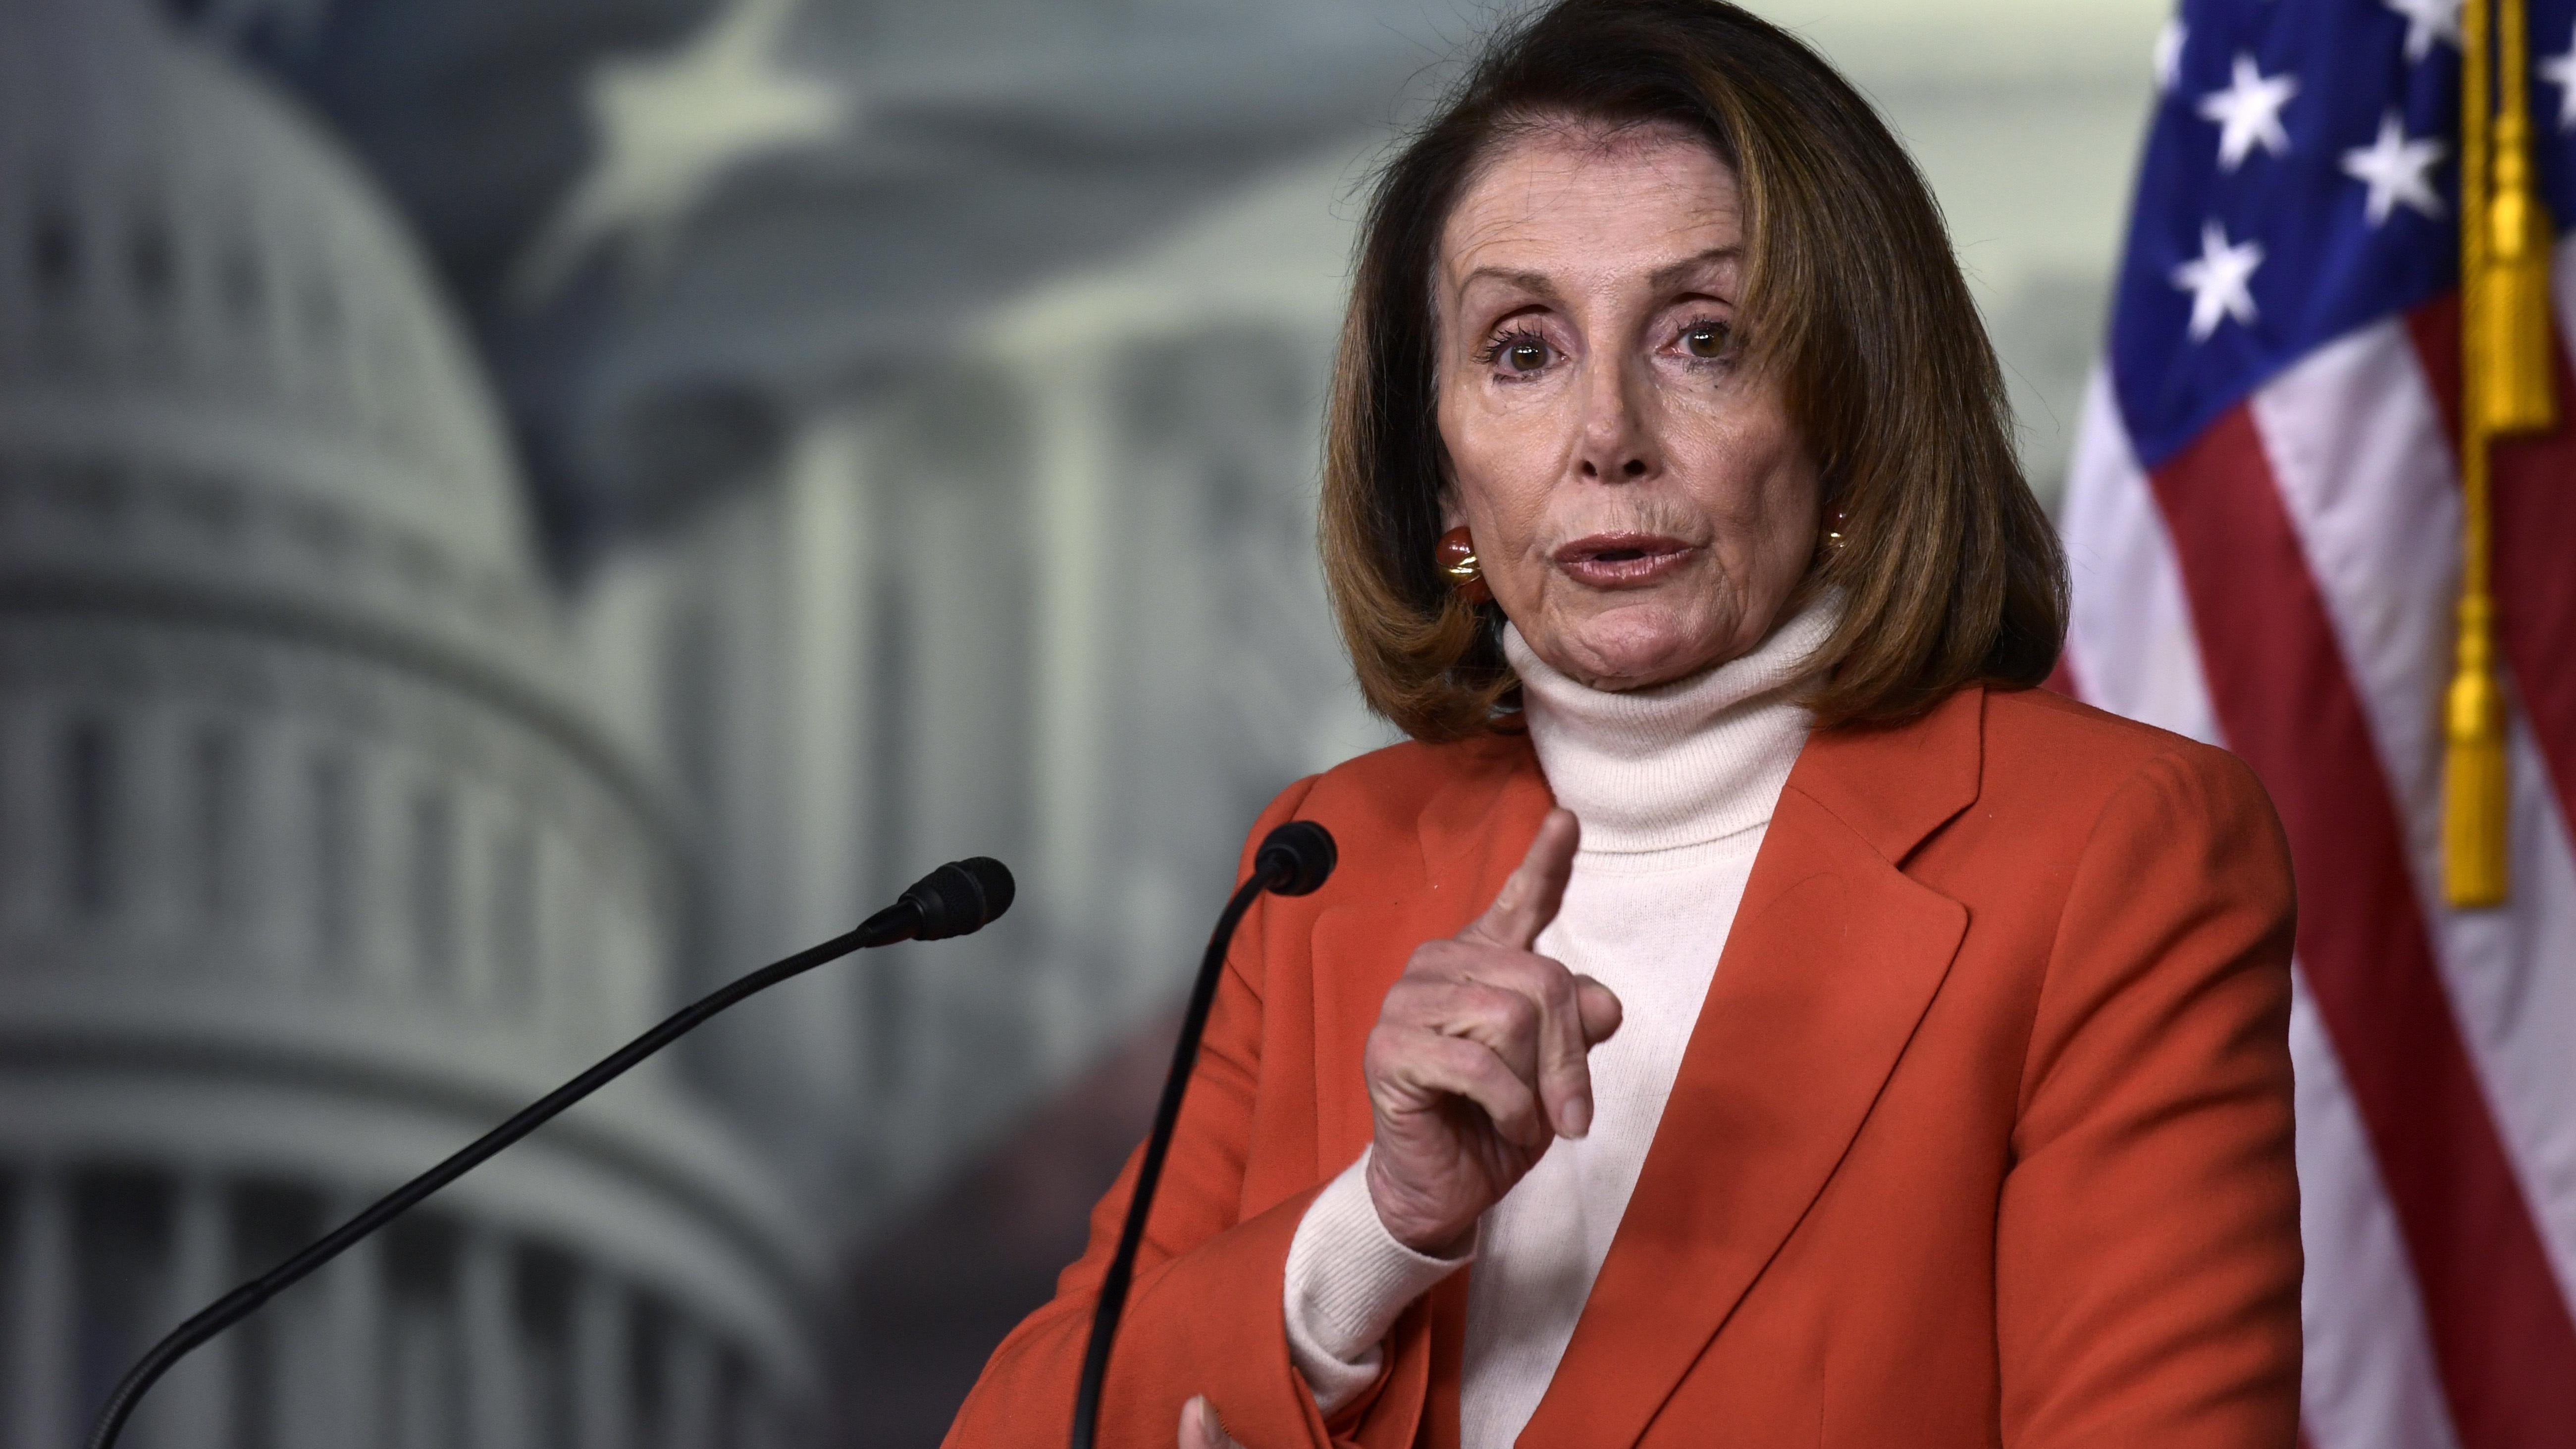 Nancy Pelosi faces a vote Wednesday on whether she will be the nominee for Speaker of the House, but three congresswomen-elect from Michigan have called for new leadership.